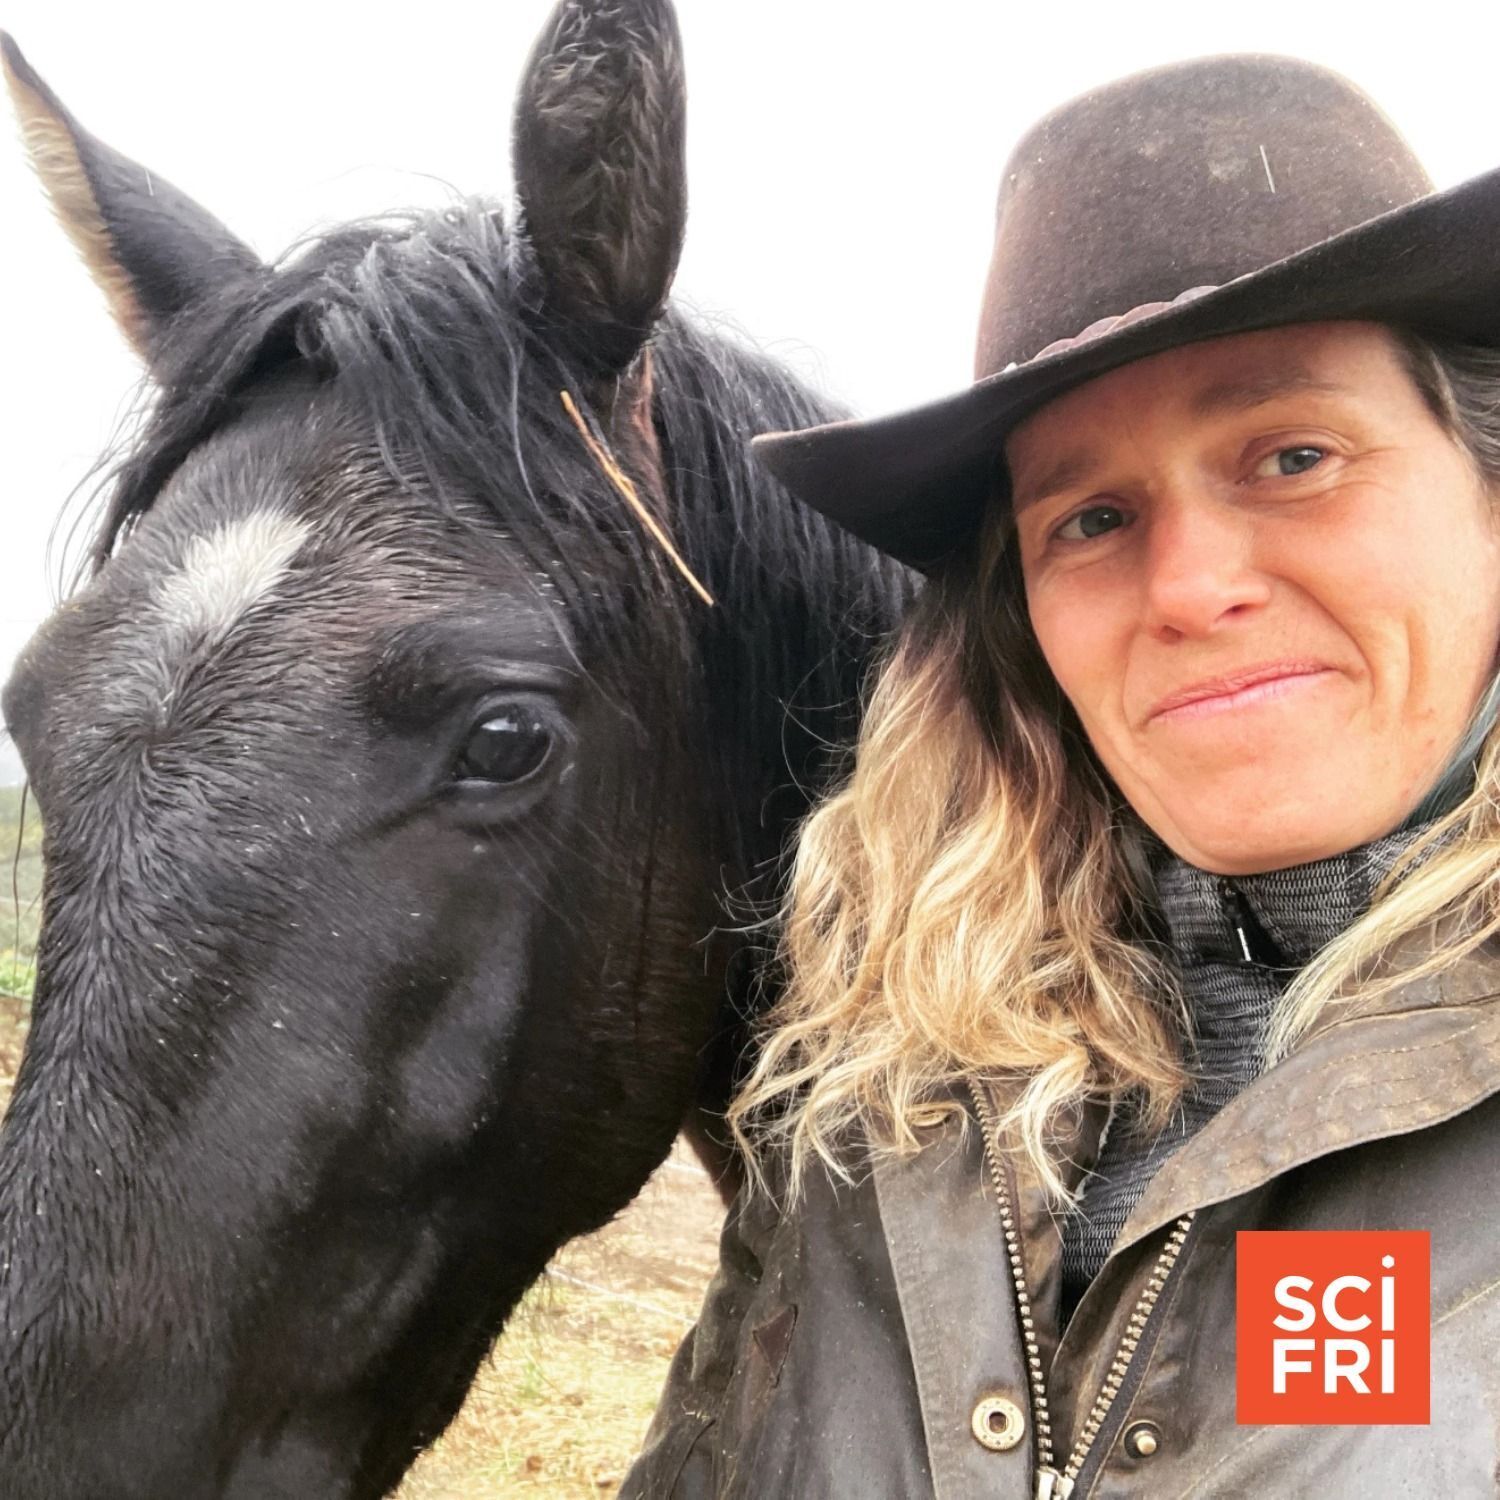 653: The West’s Wild Horses | Artist Explores History Of Humans Genetically Modifying Pigs